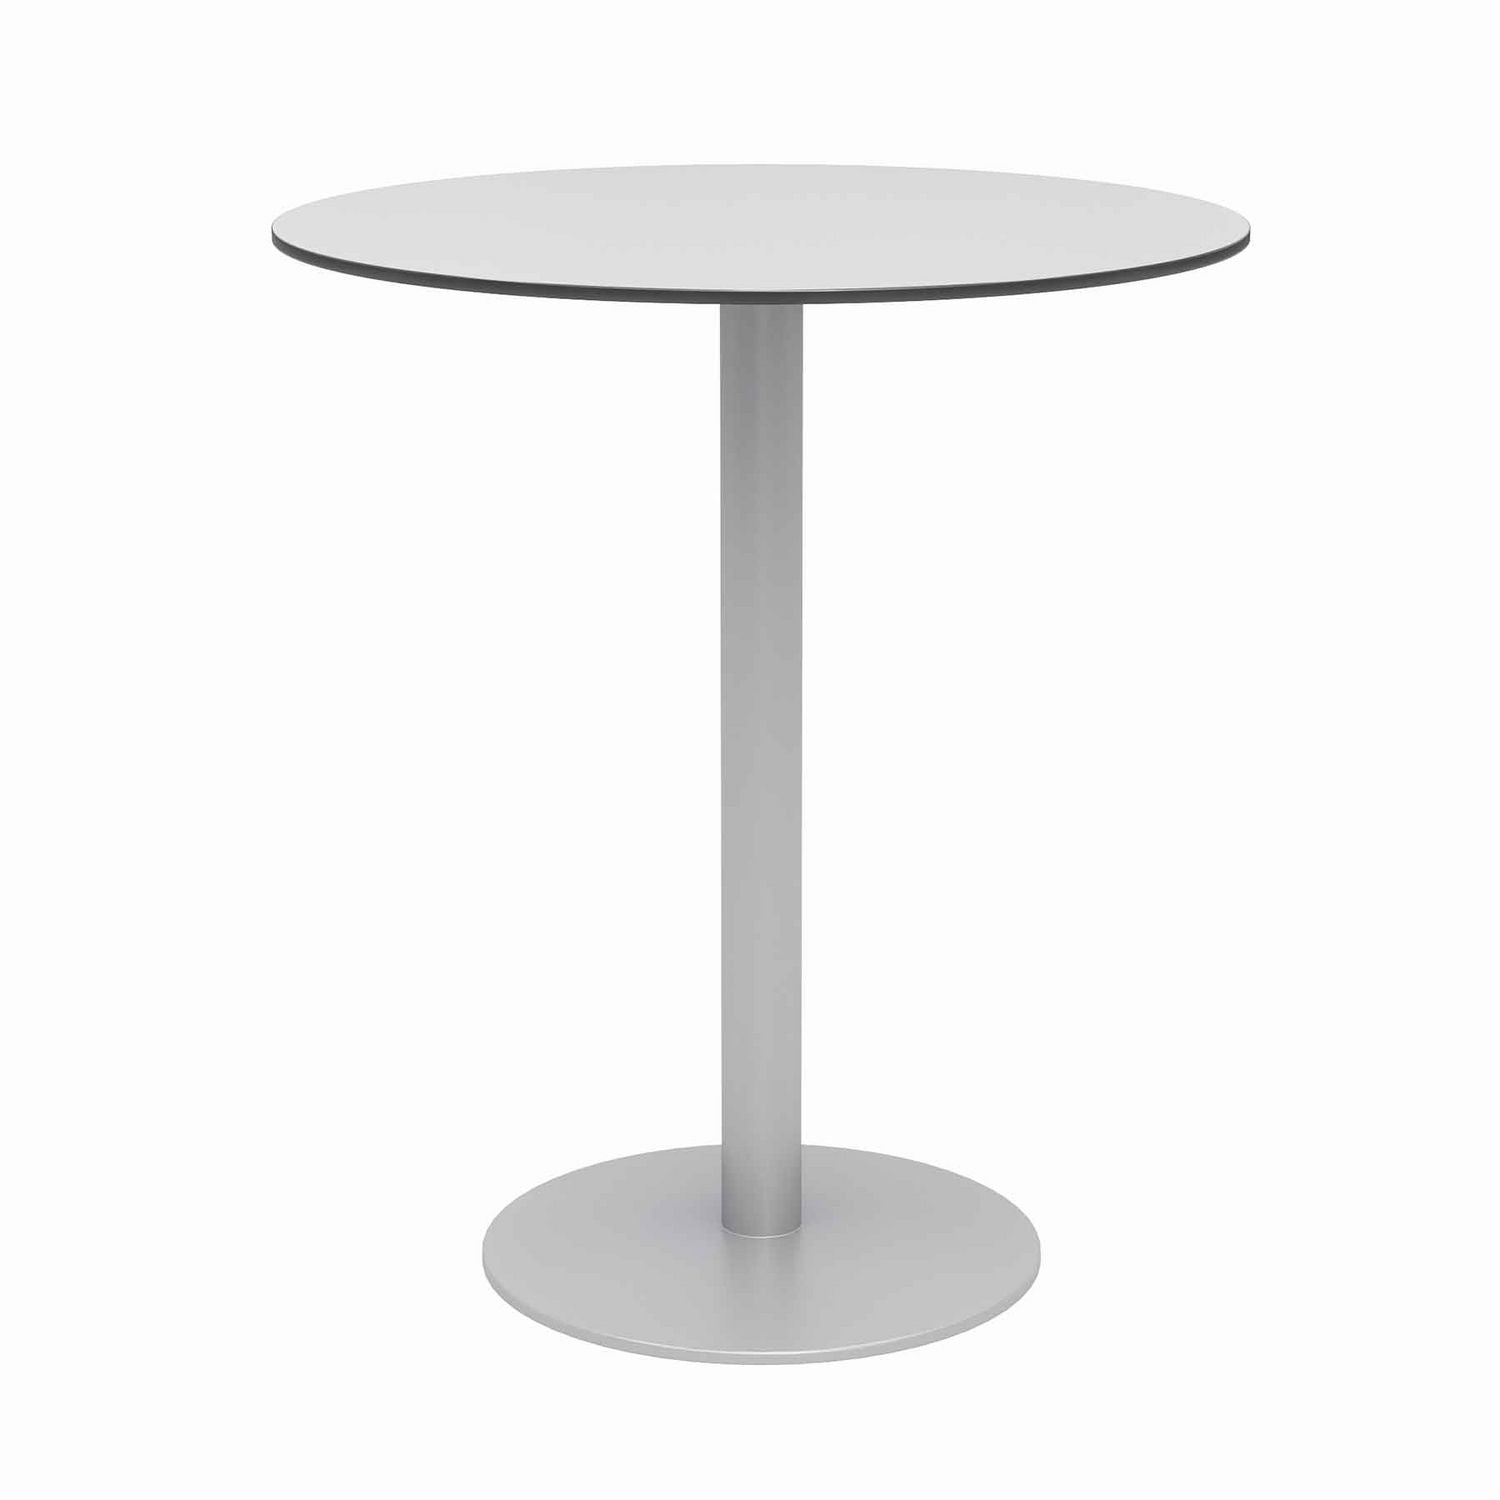 eveleen-outdoor-bistro-patio-table-w-four-mocha-powder-coated-polymer-barstools-round-41h-gray-ships-in-4-6-bus-days_kfi840031918505 - 2